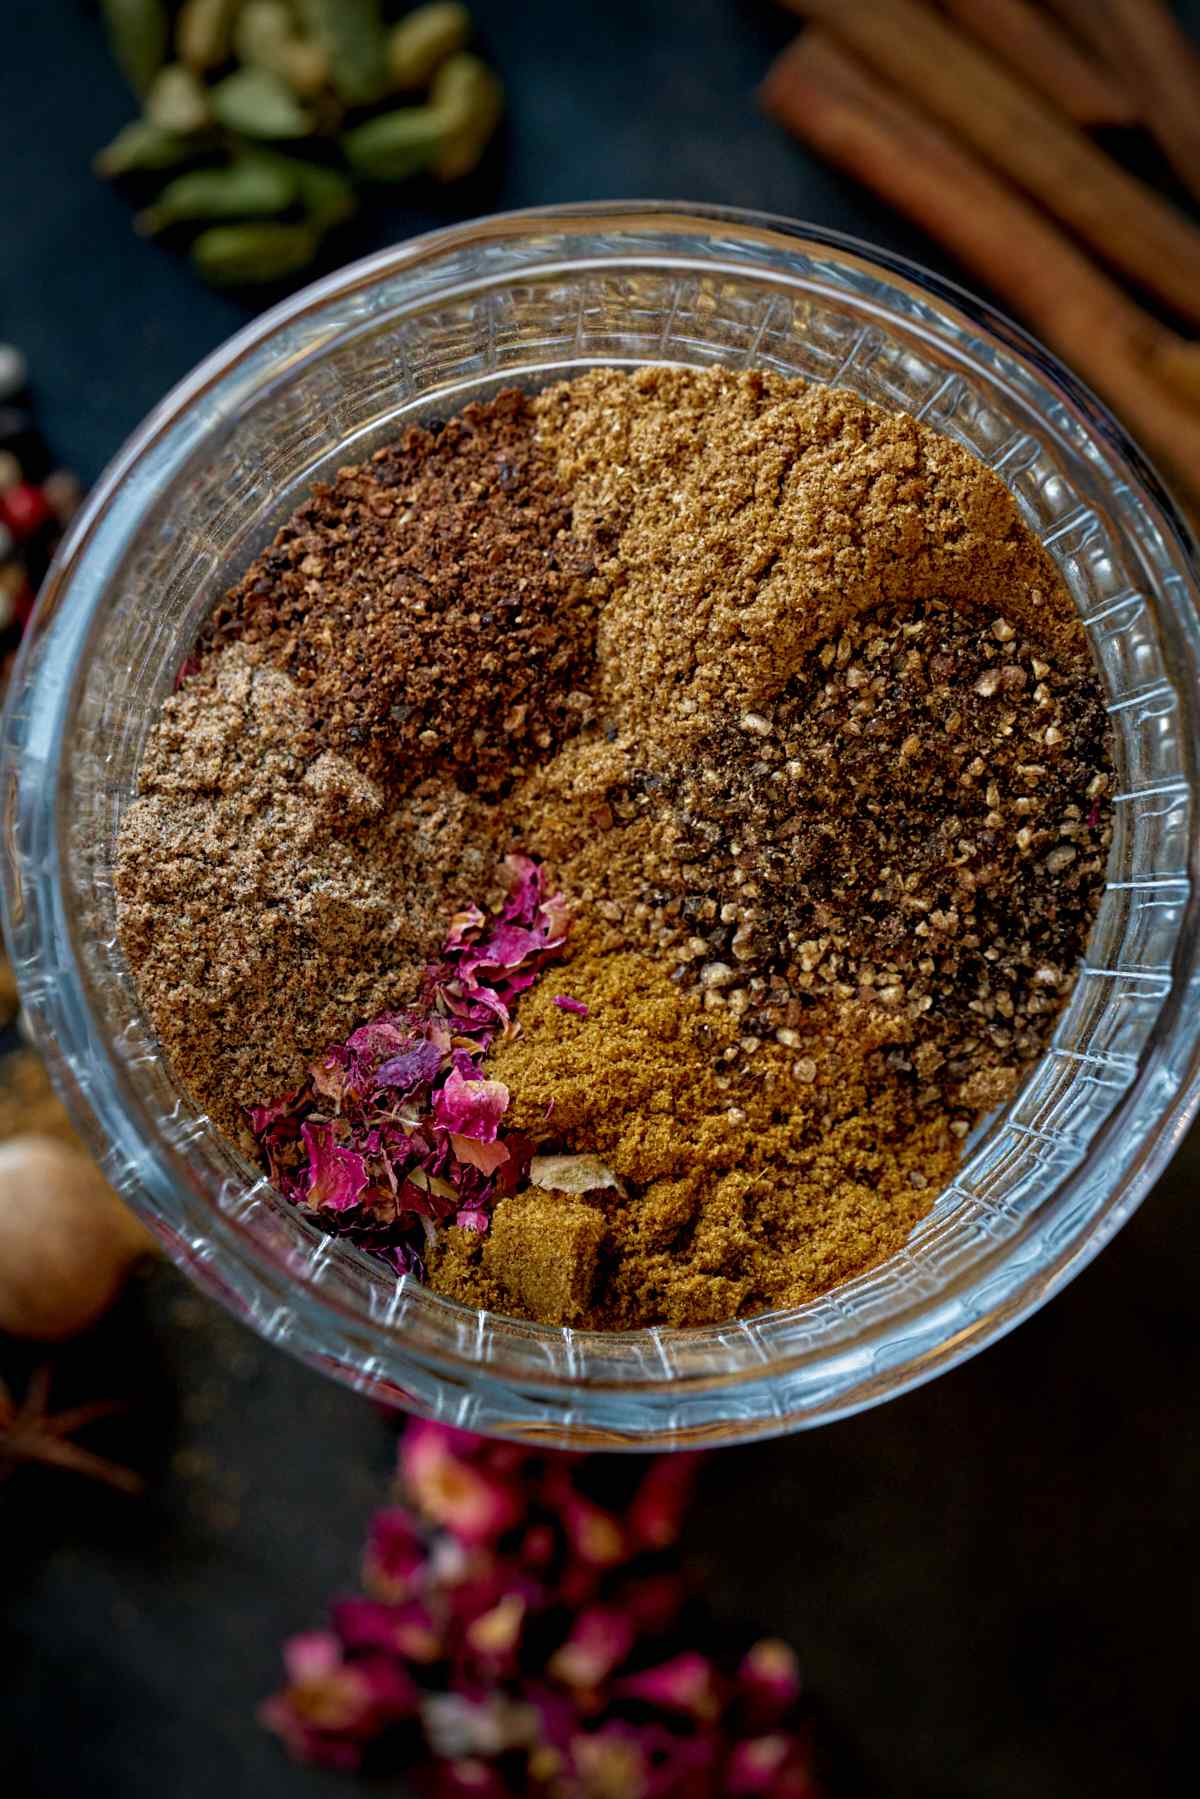 Spices in a glass bowl.